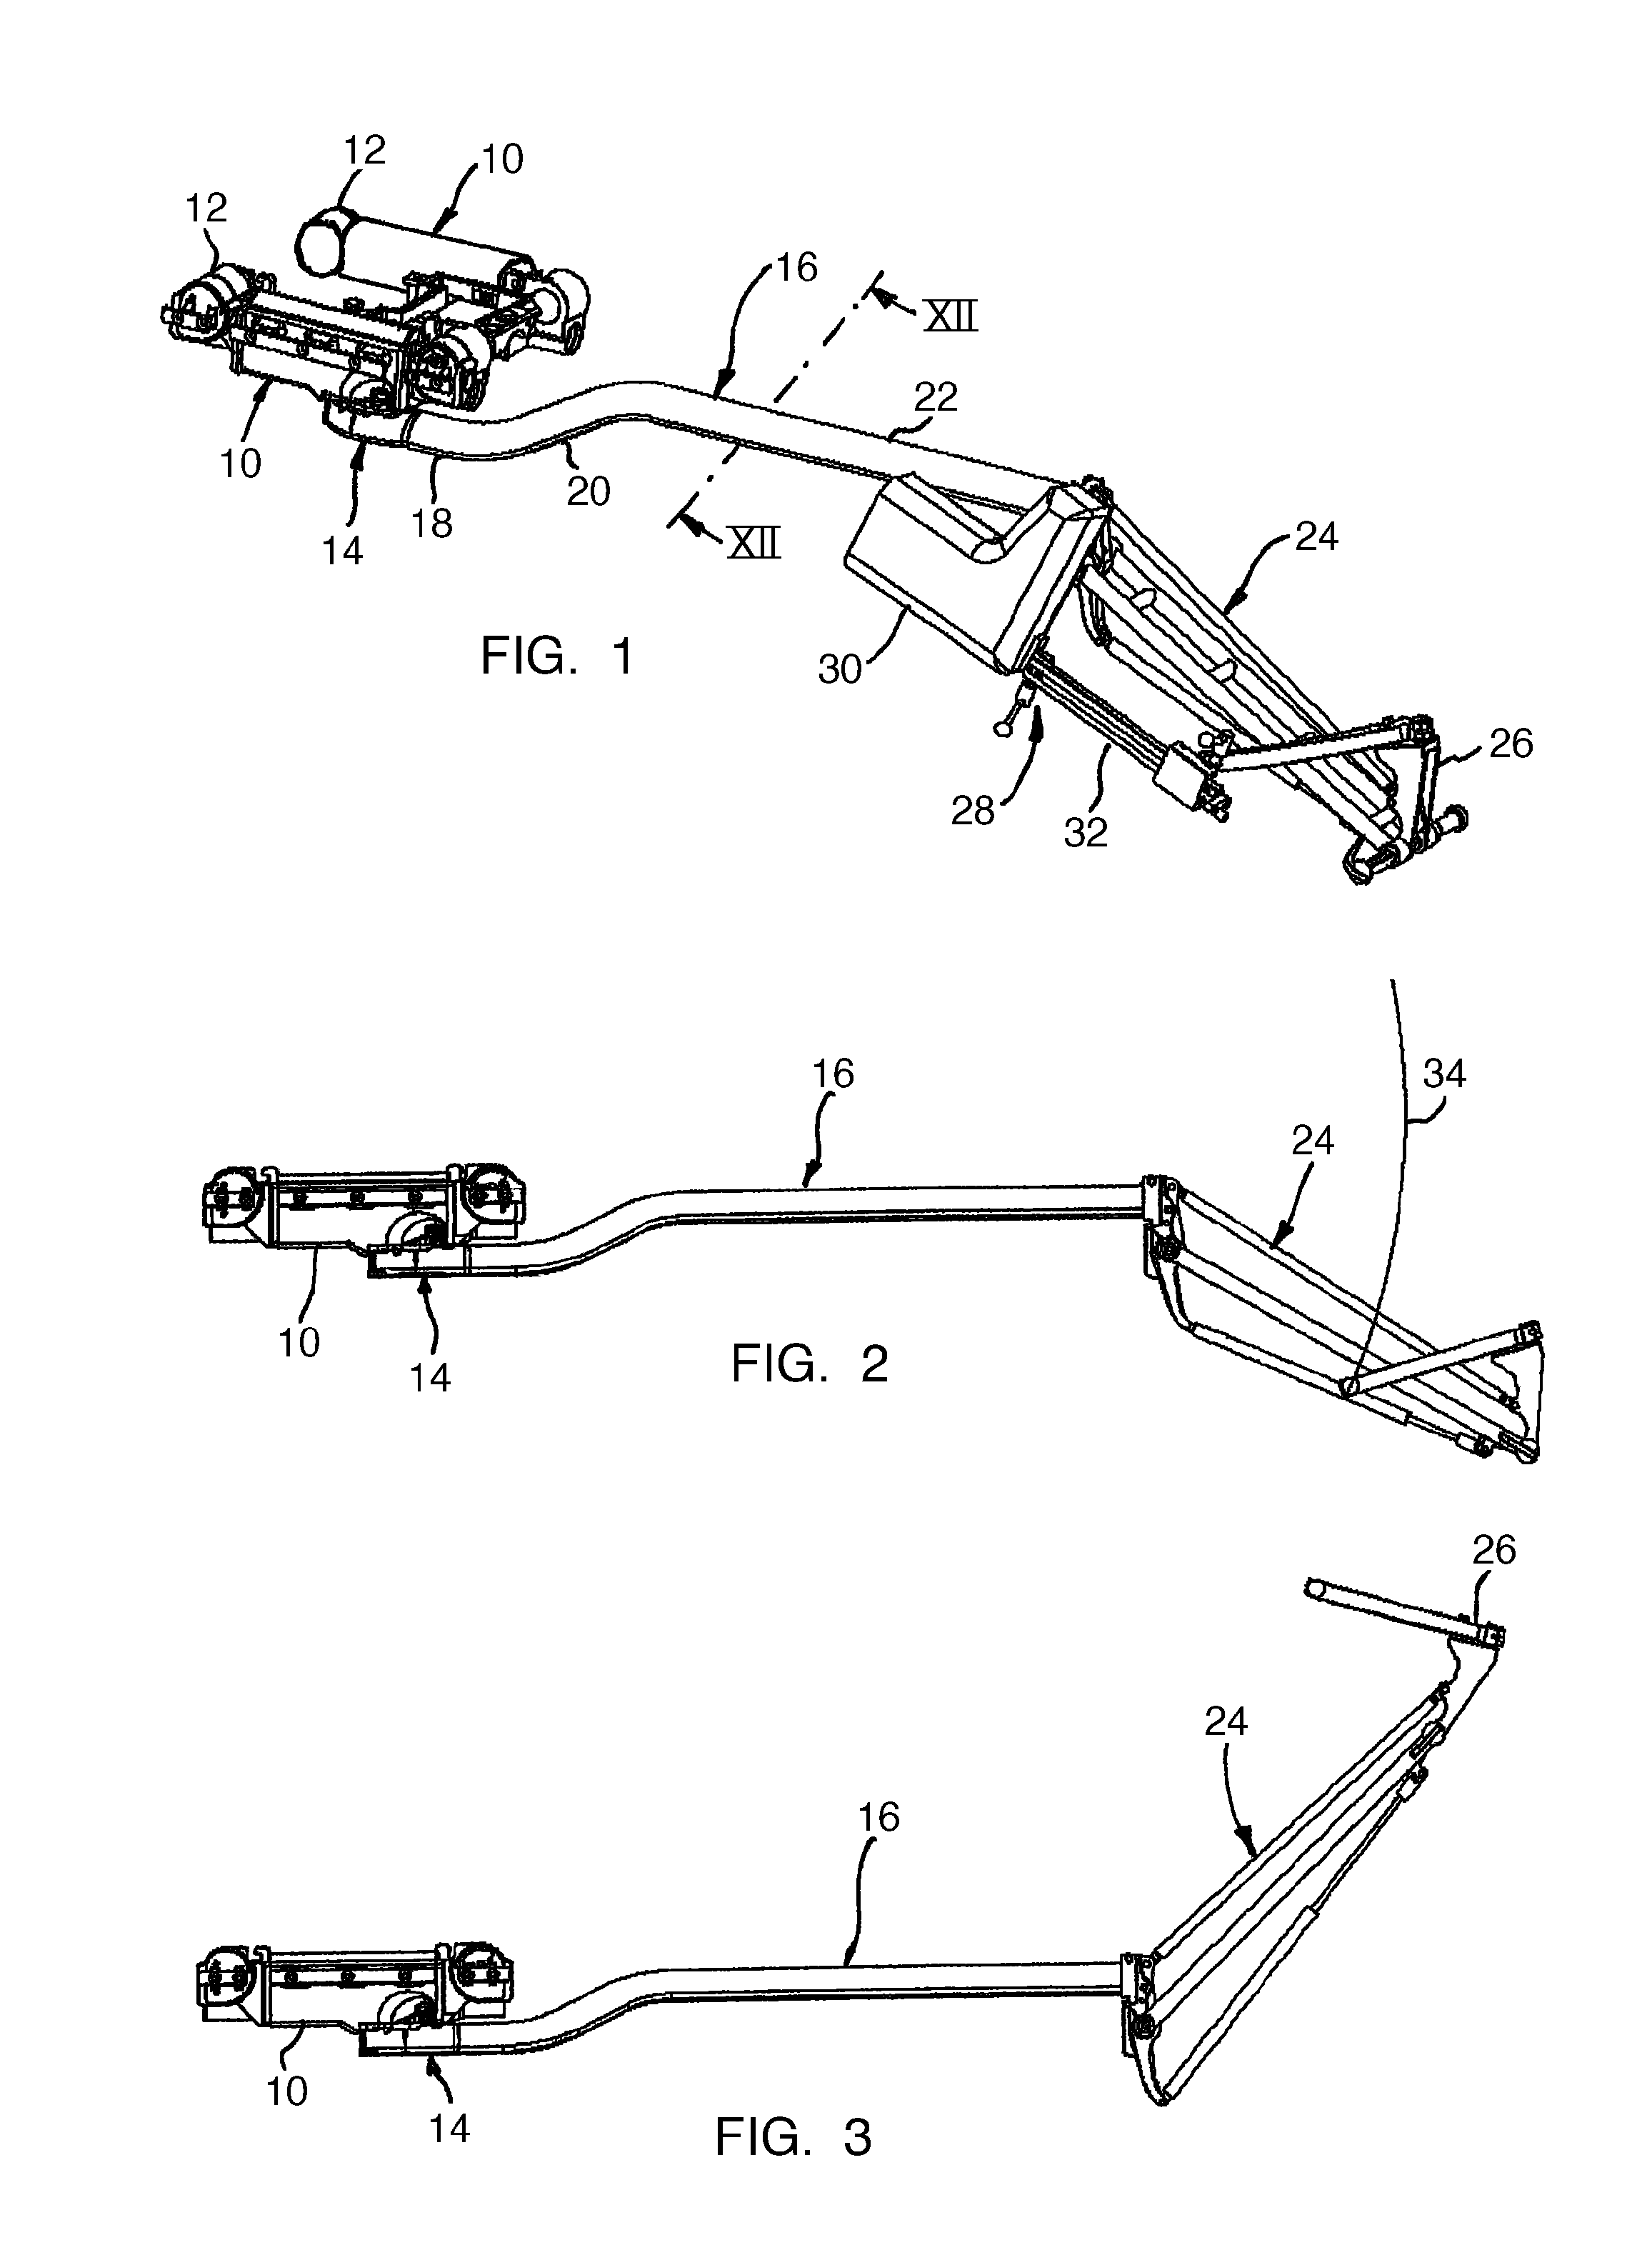 Extension device